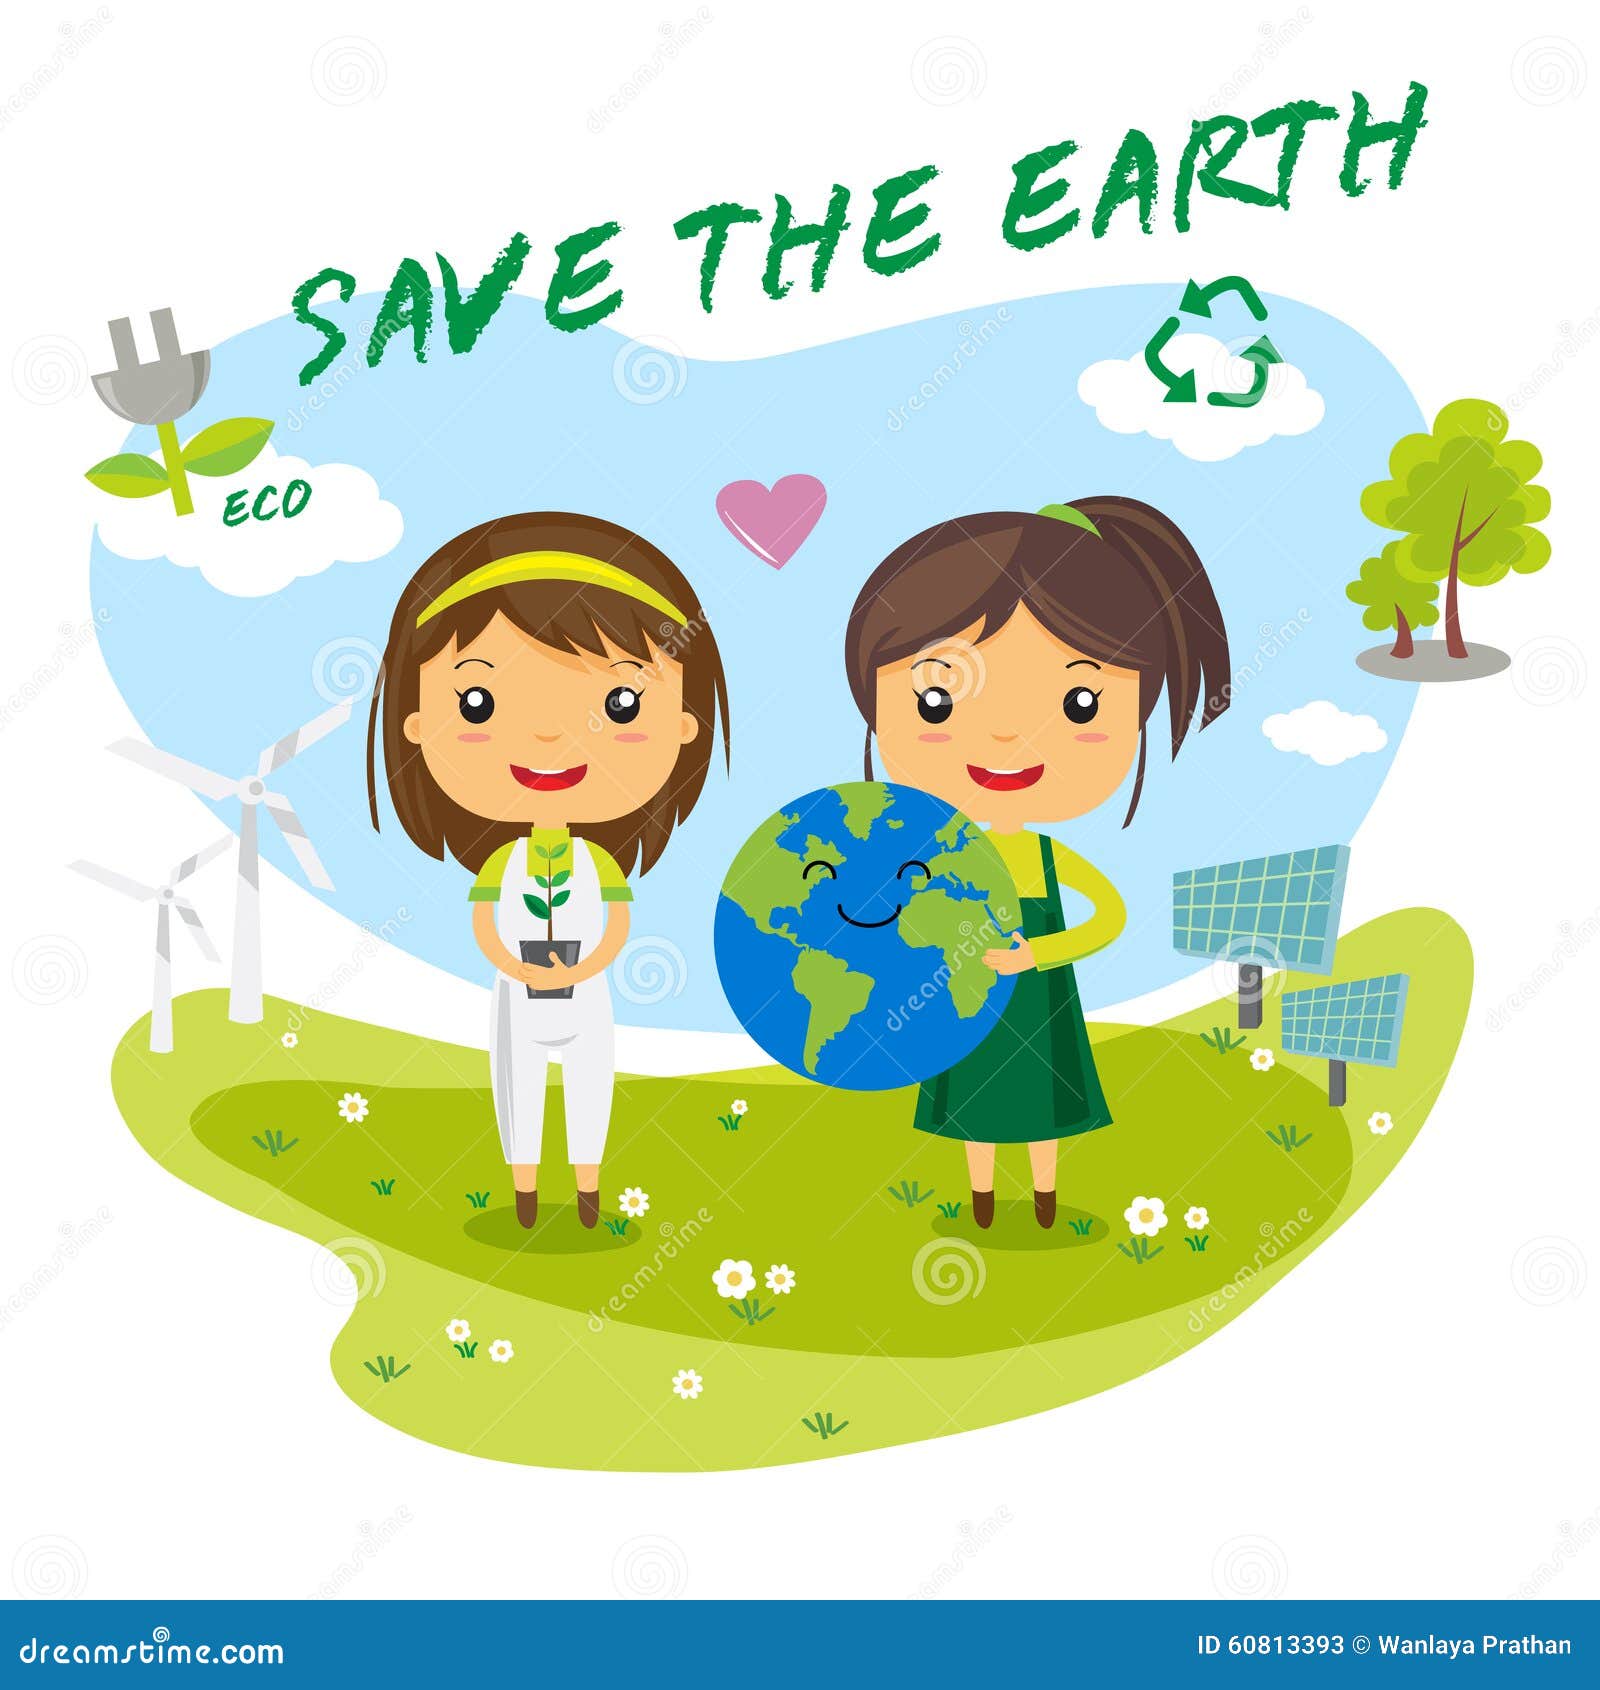 Save The Earth - Save World Stock Vector - Image: 60813393